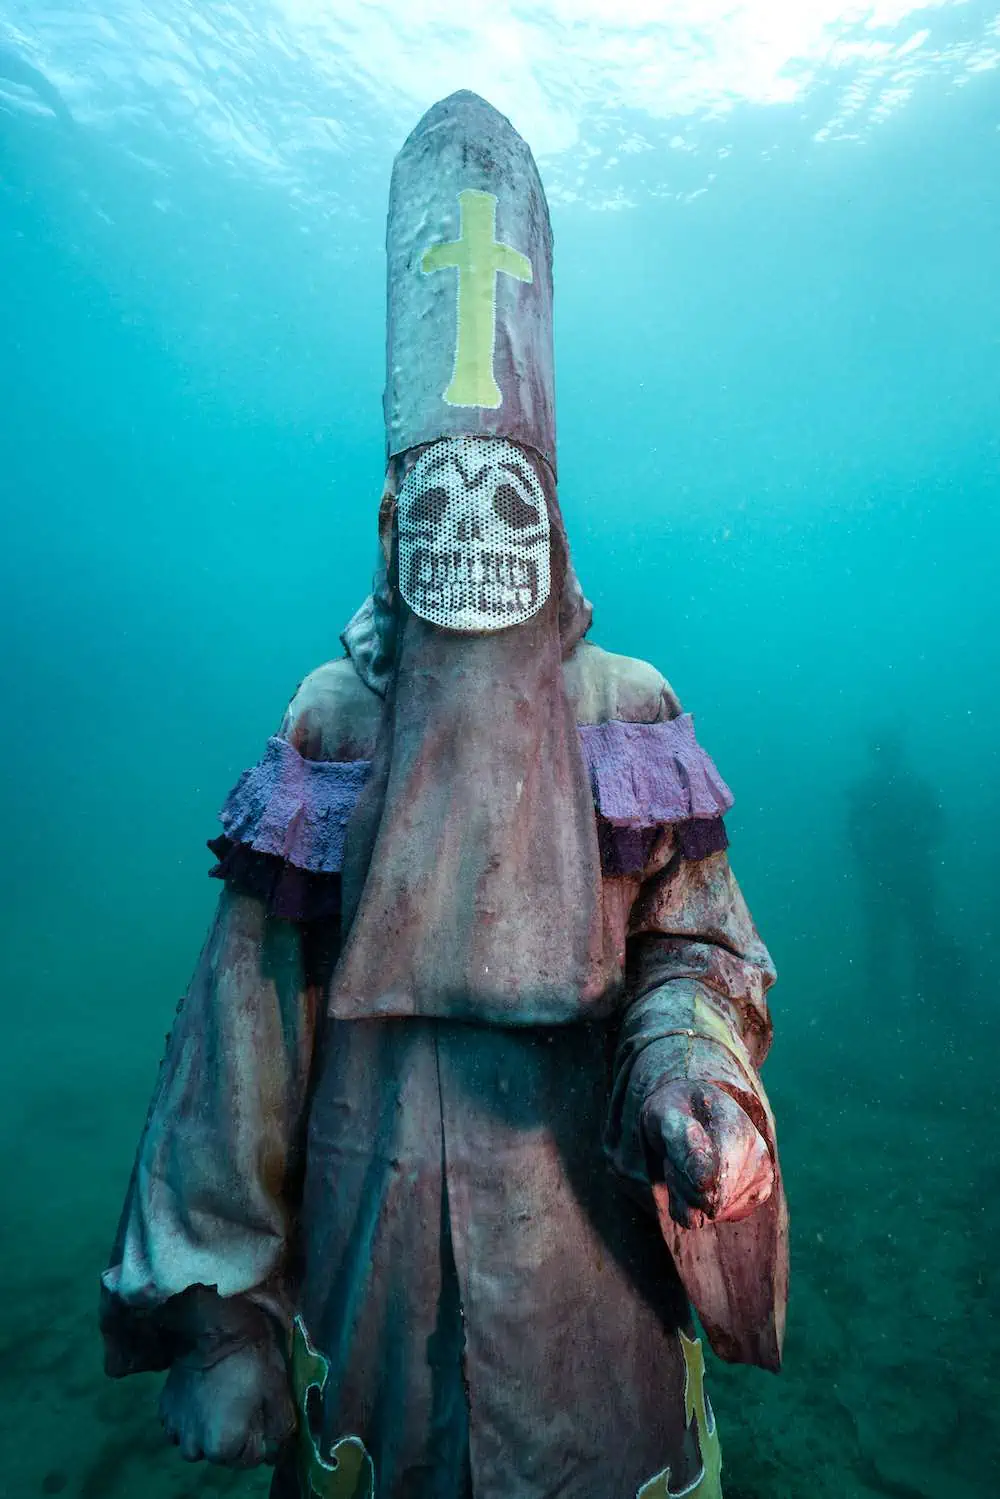 A Coral Carnival sculpture by Jason de Caires Taylor at the Grenada Underwater Sculpture Park.